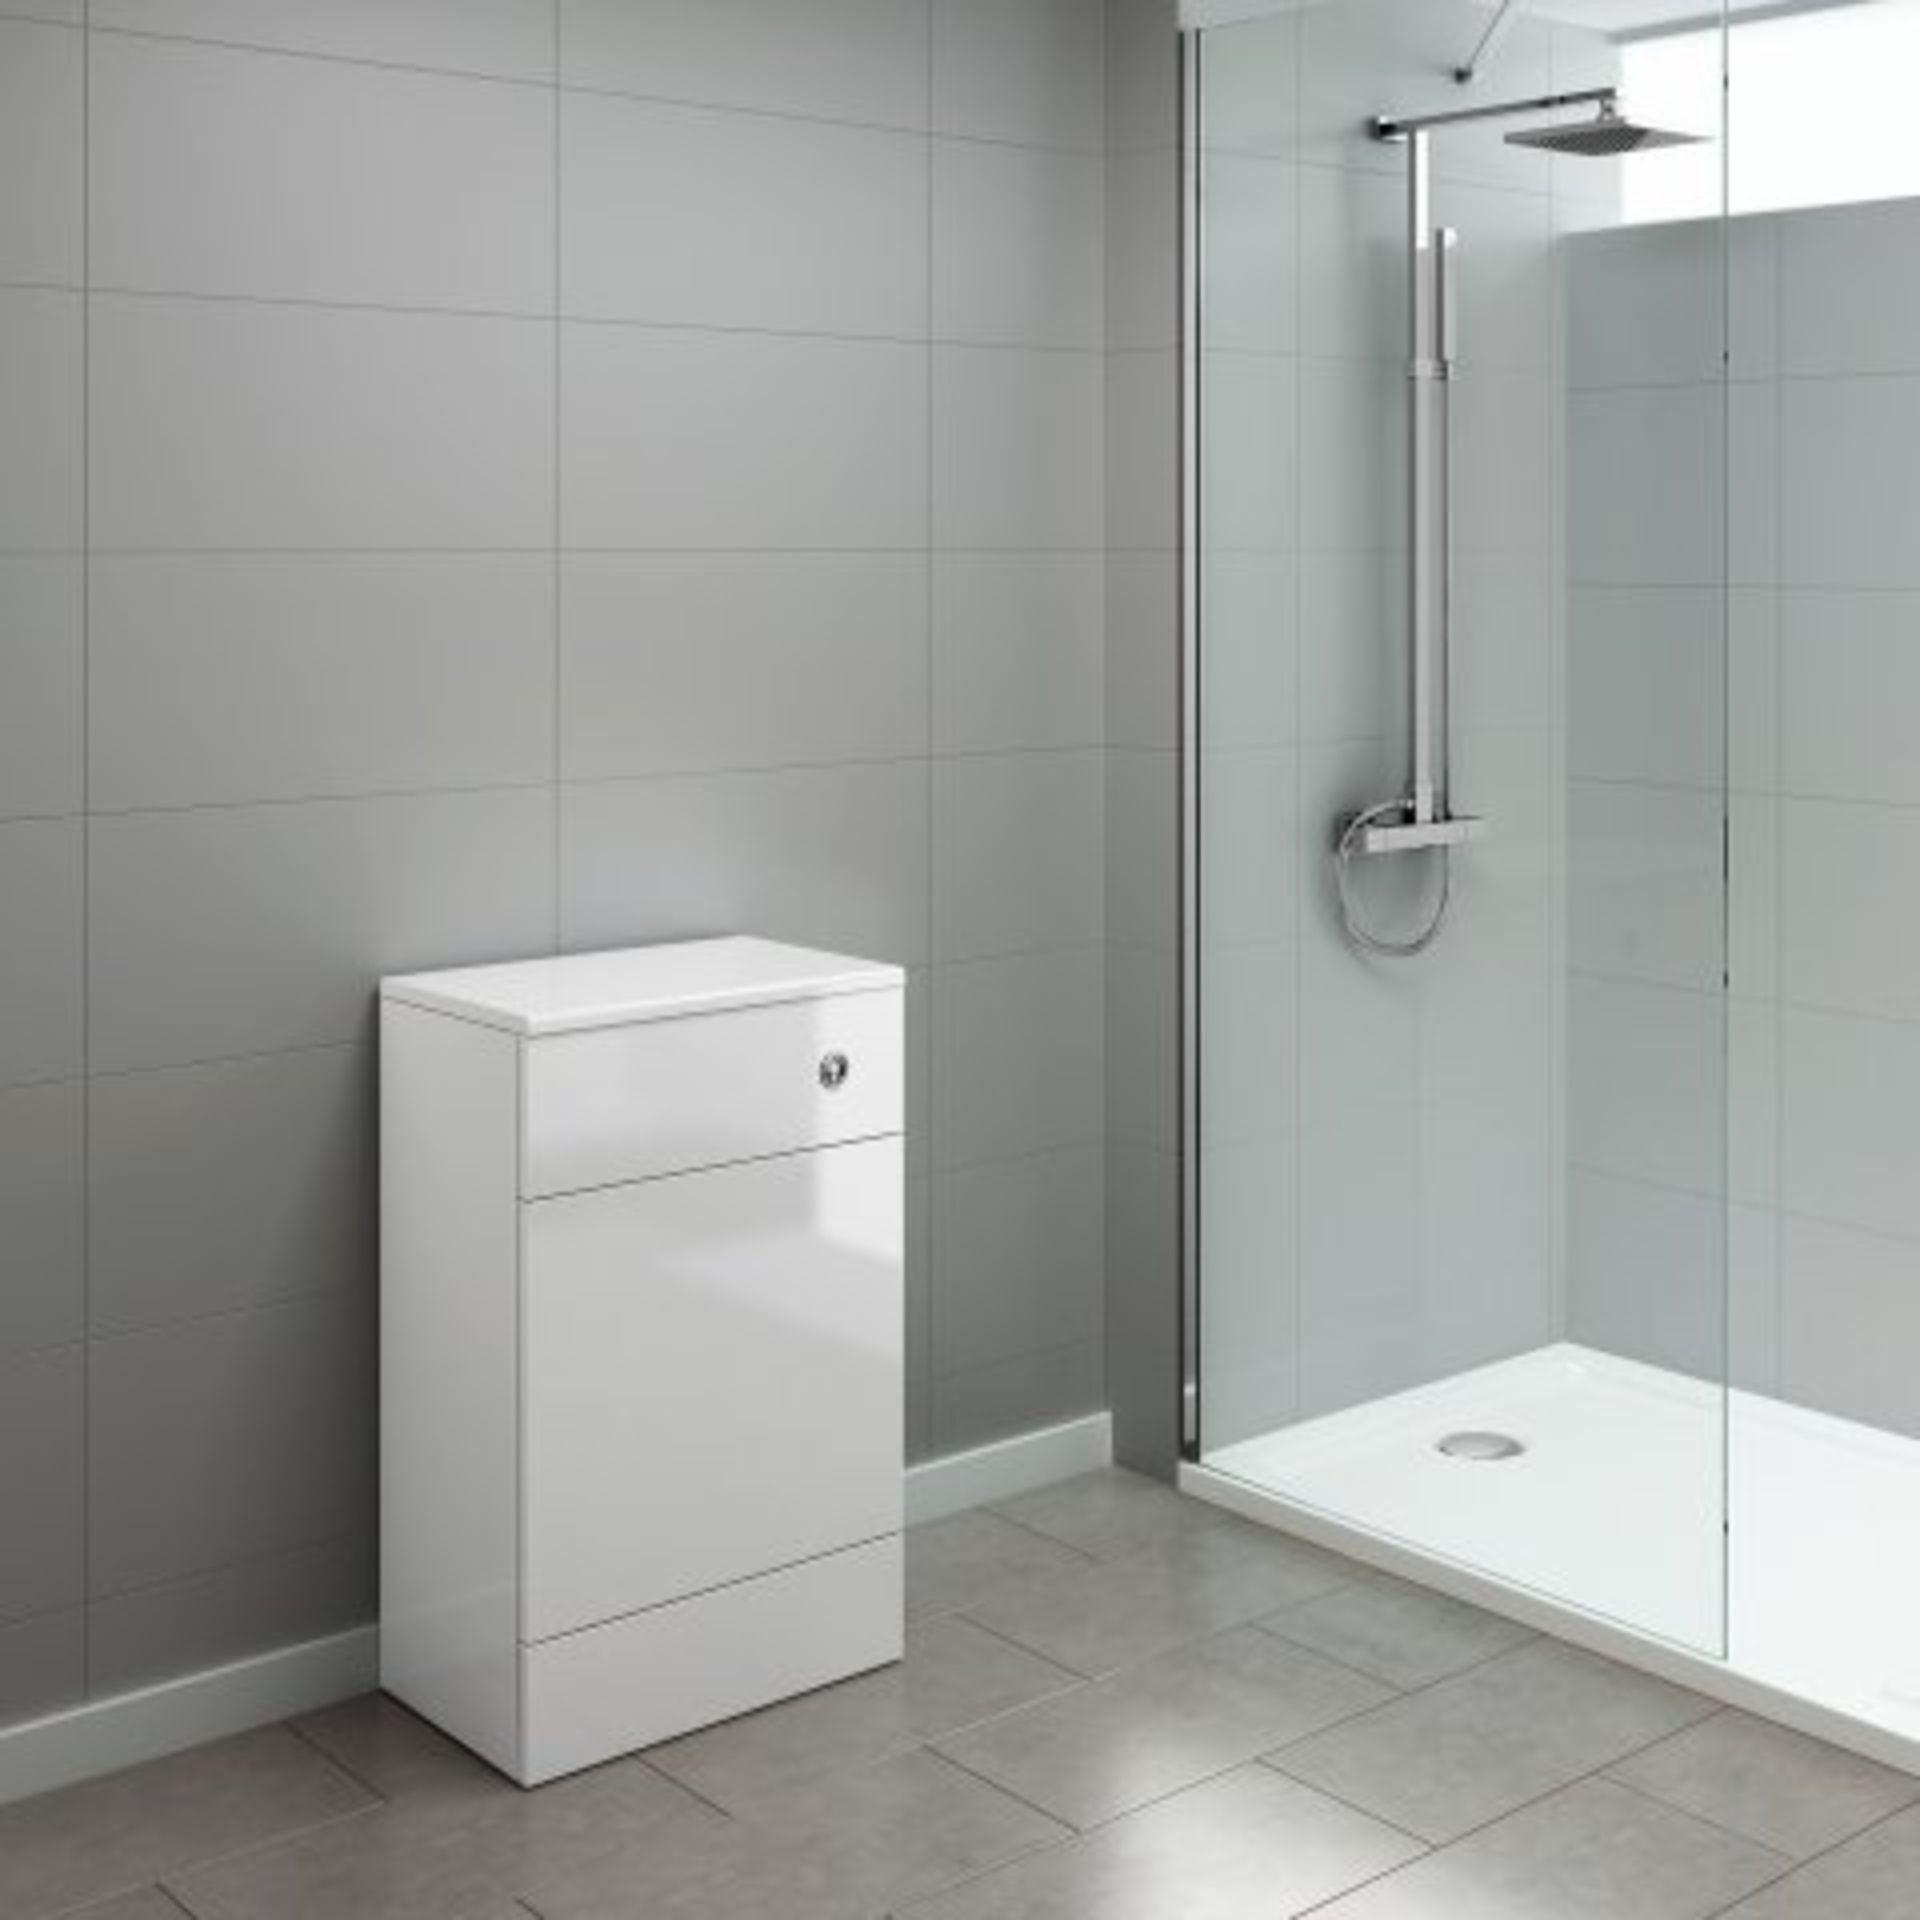 (H94) 500mm Harper Gloss White Back To Wall Toilet Unit. RRP £174.99. This practical Harper Gloss - Image 3 of 3